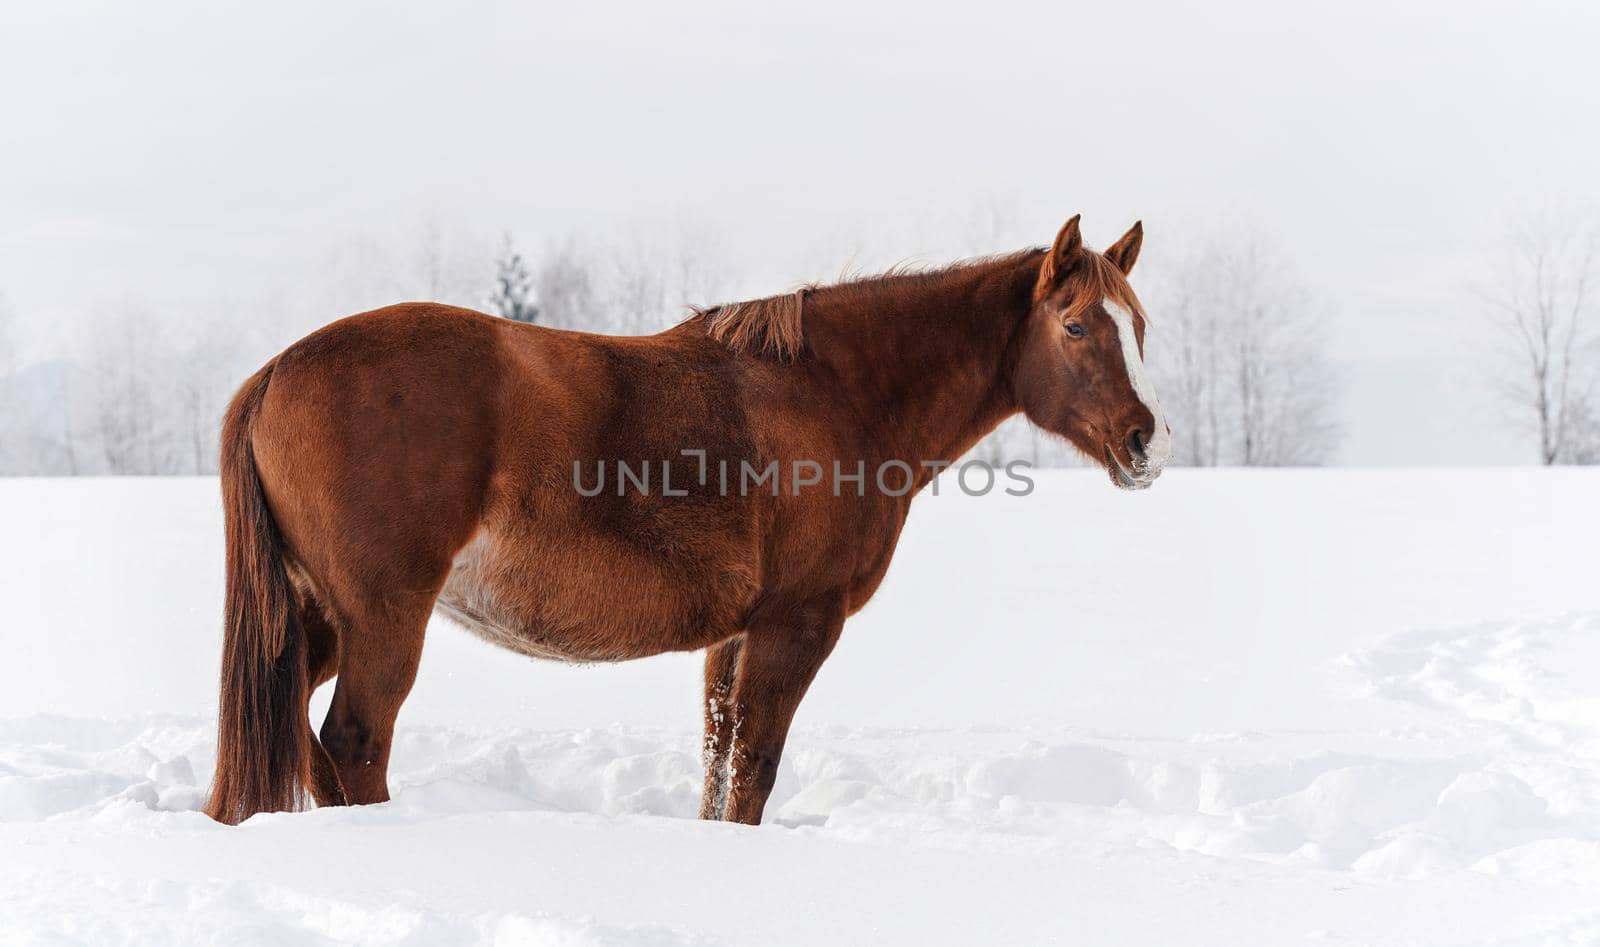 Brown horse standing on winter snow covered field, view from side.